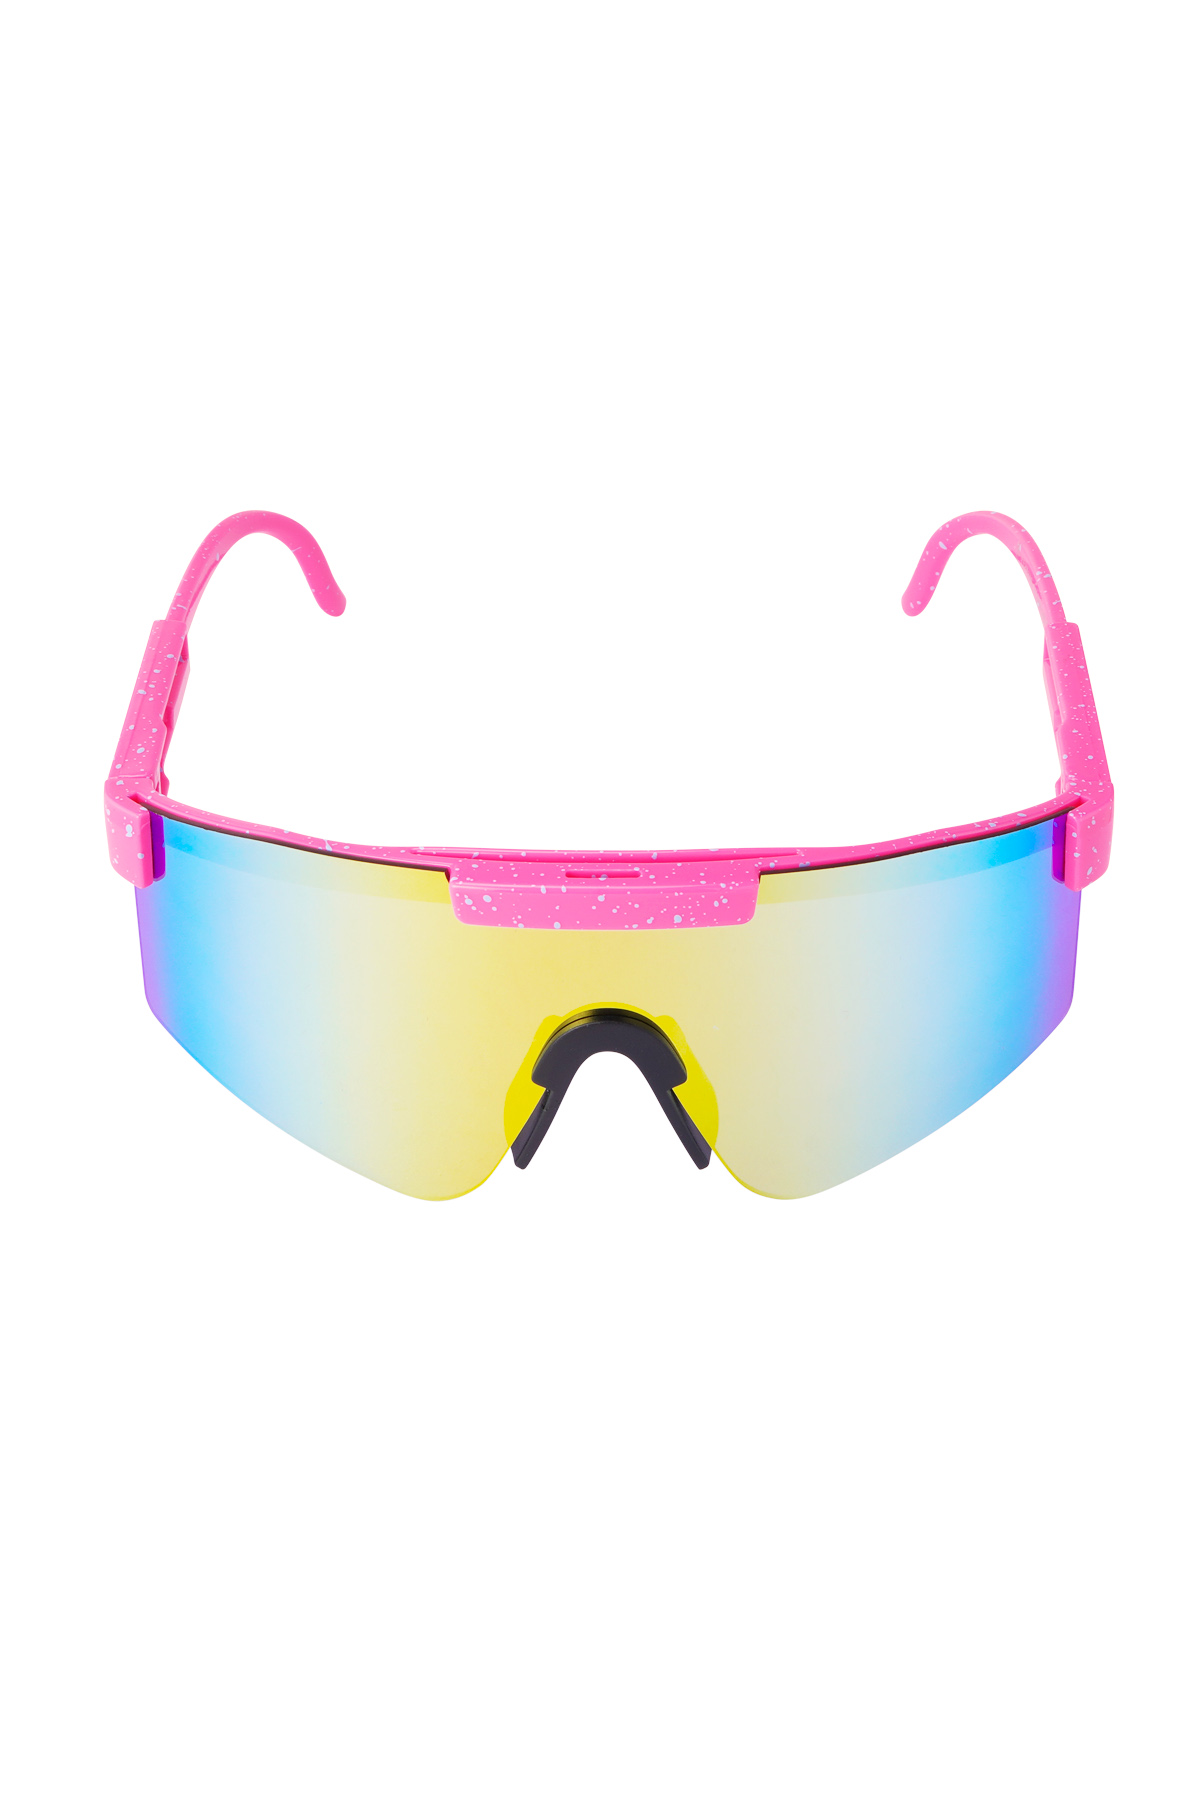 Sunglasses print colored lenses - pink Picture6